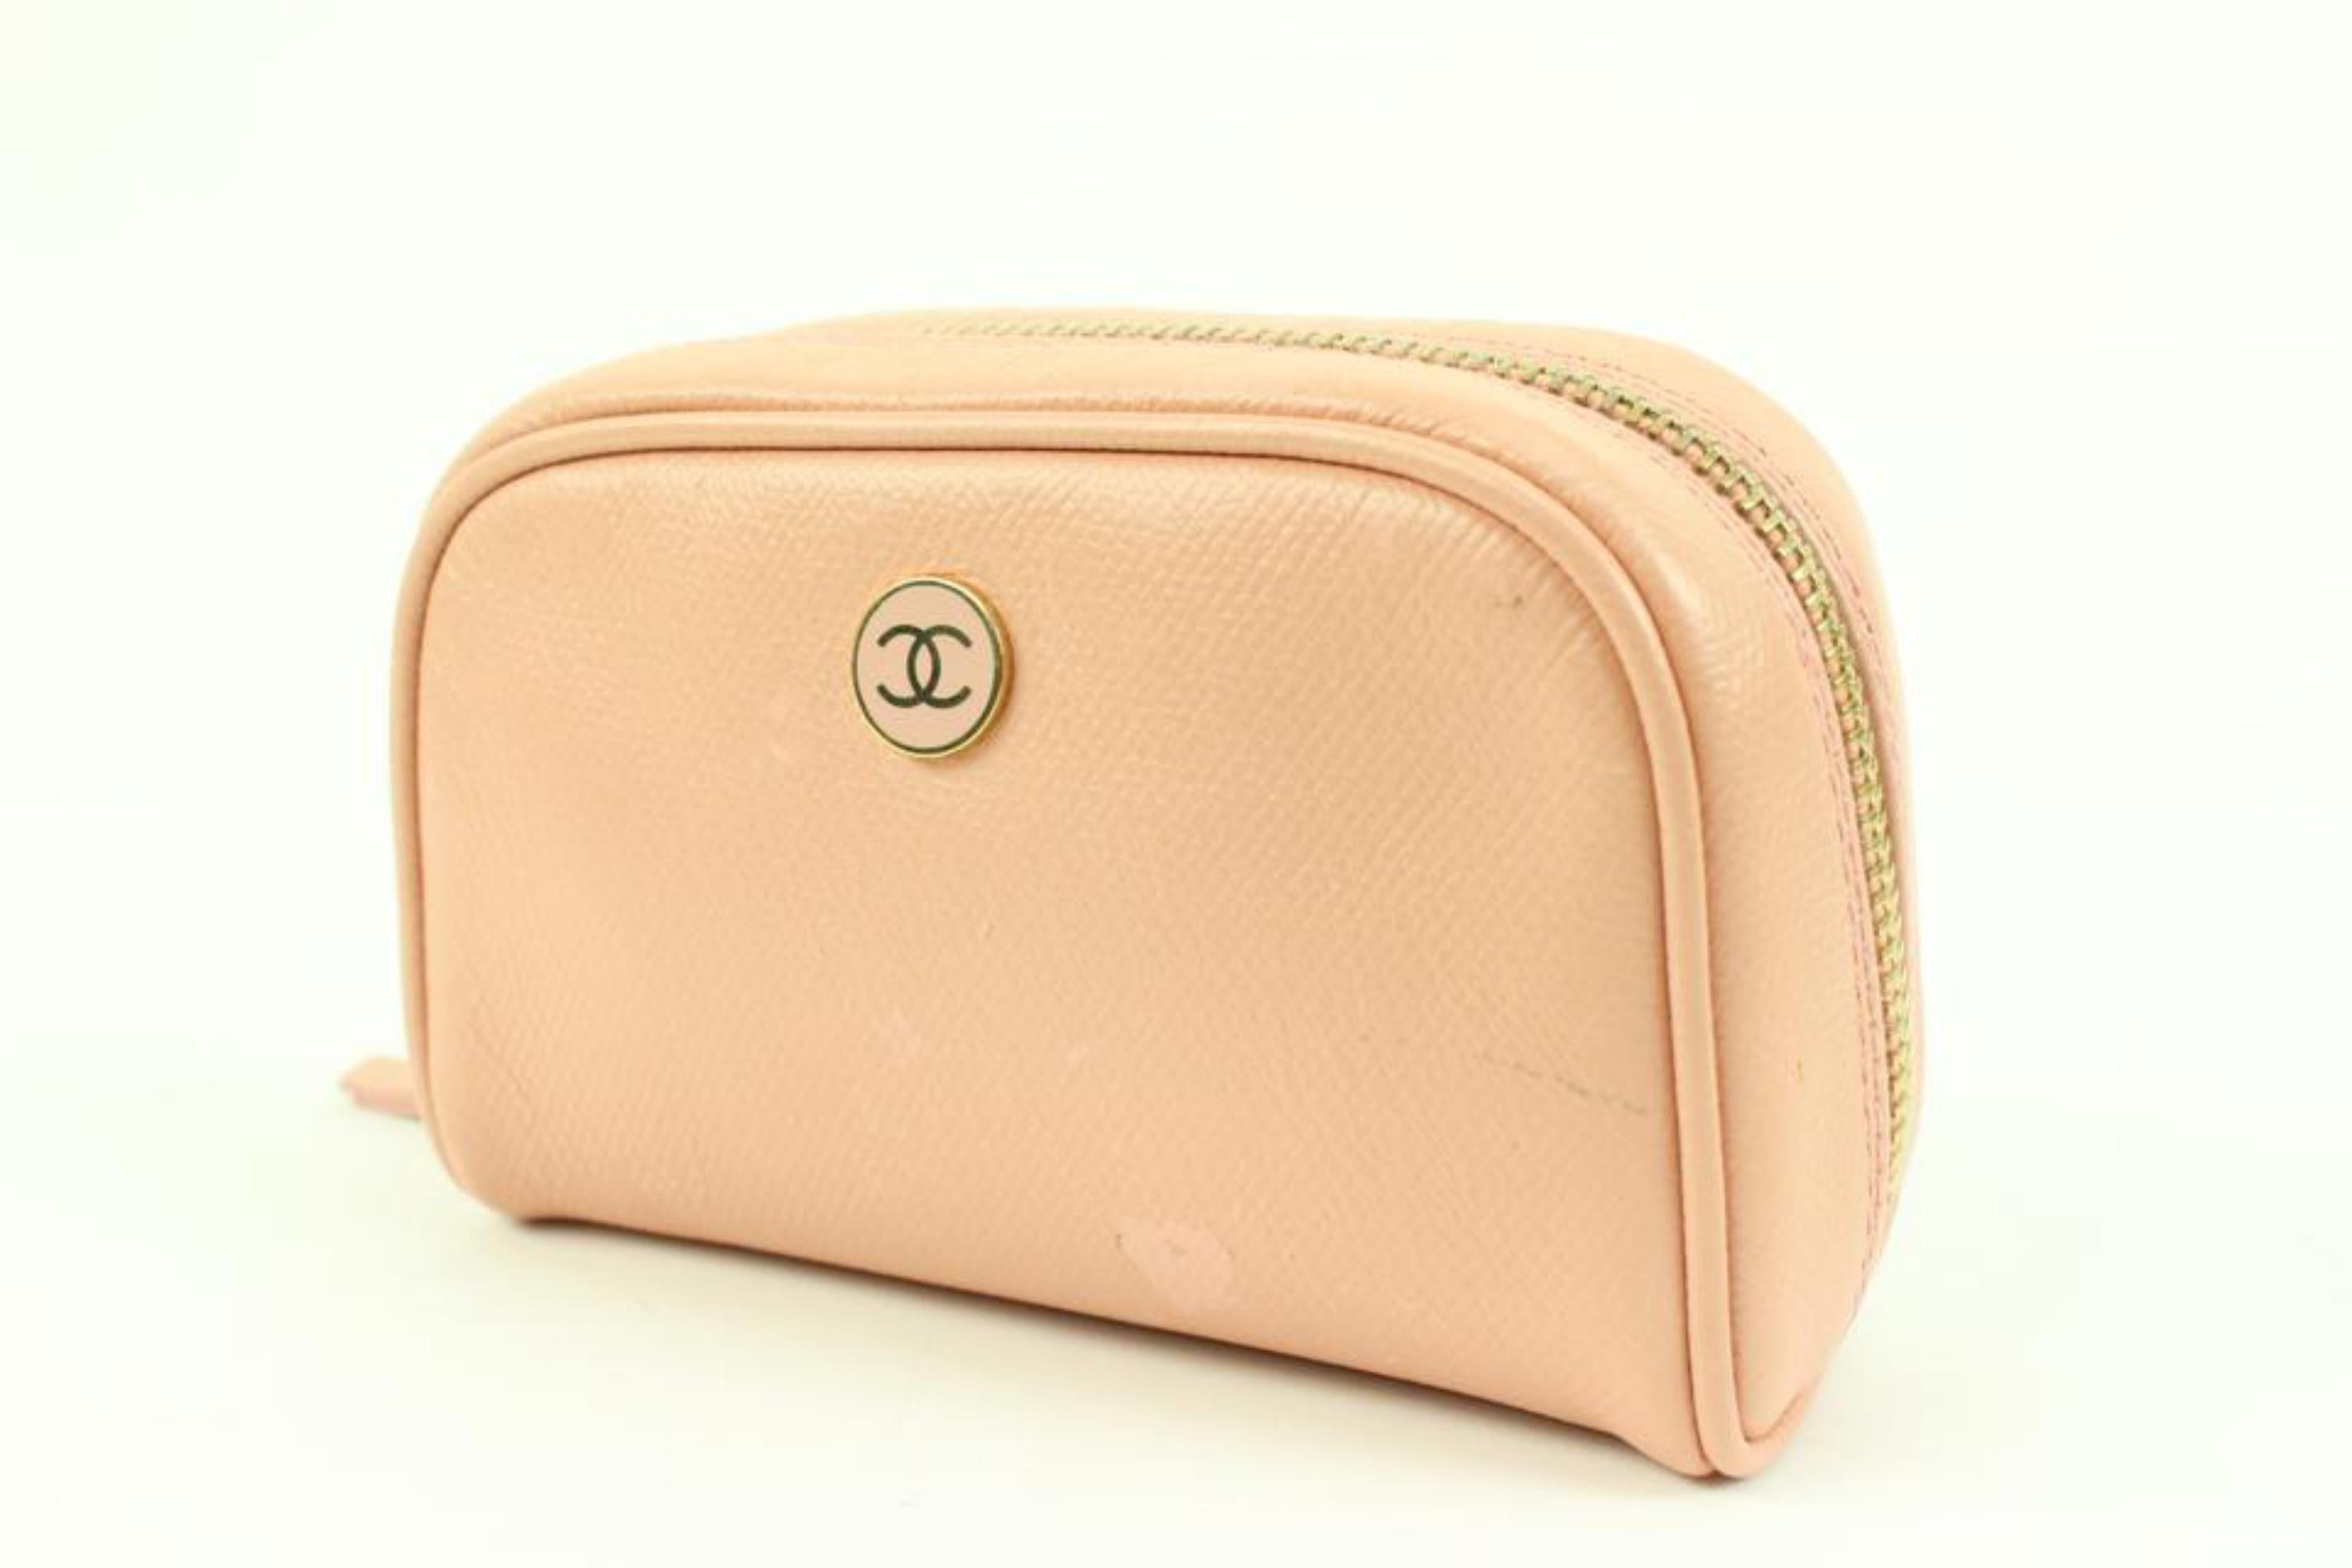 Chanel Limited Edition Pink Calfskin Button Line Cosmetic Pouch 94ck323s
Made In: Italy
Measurements: Length:  5